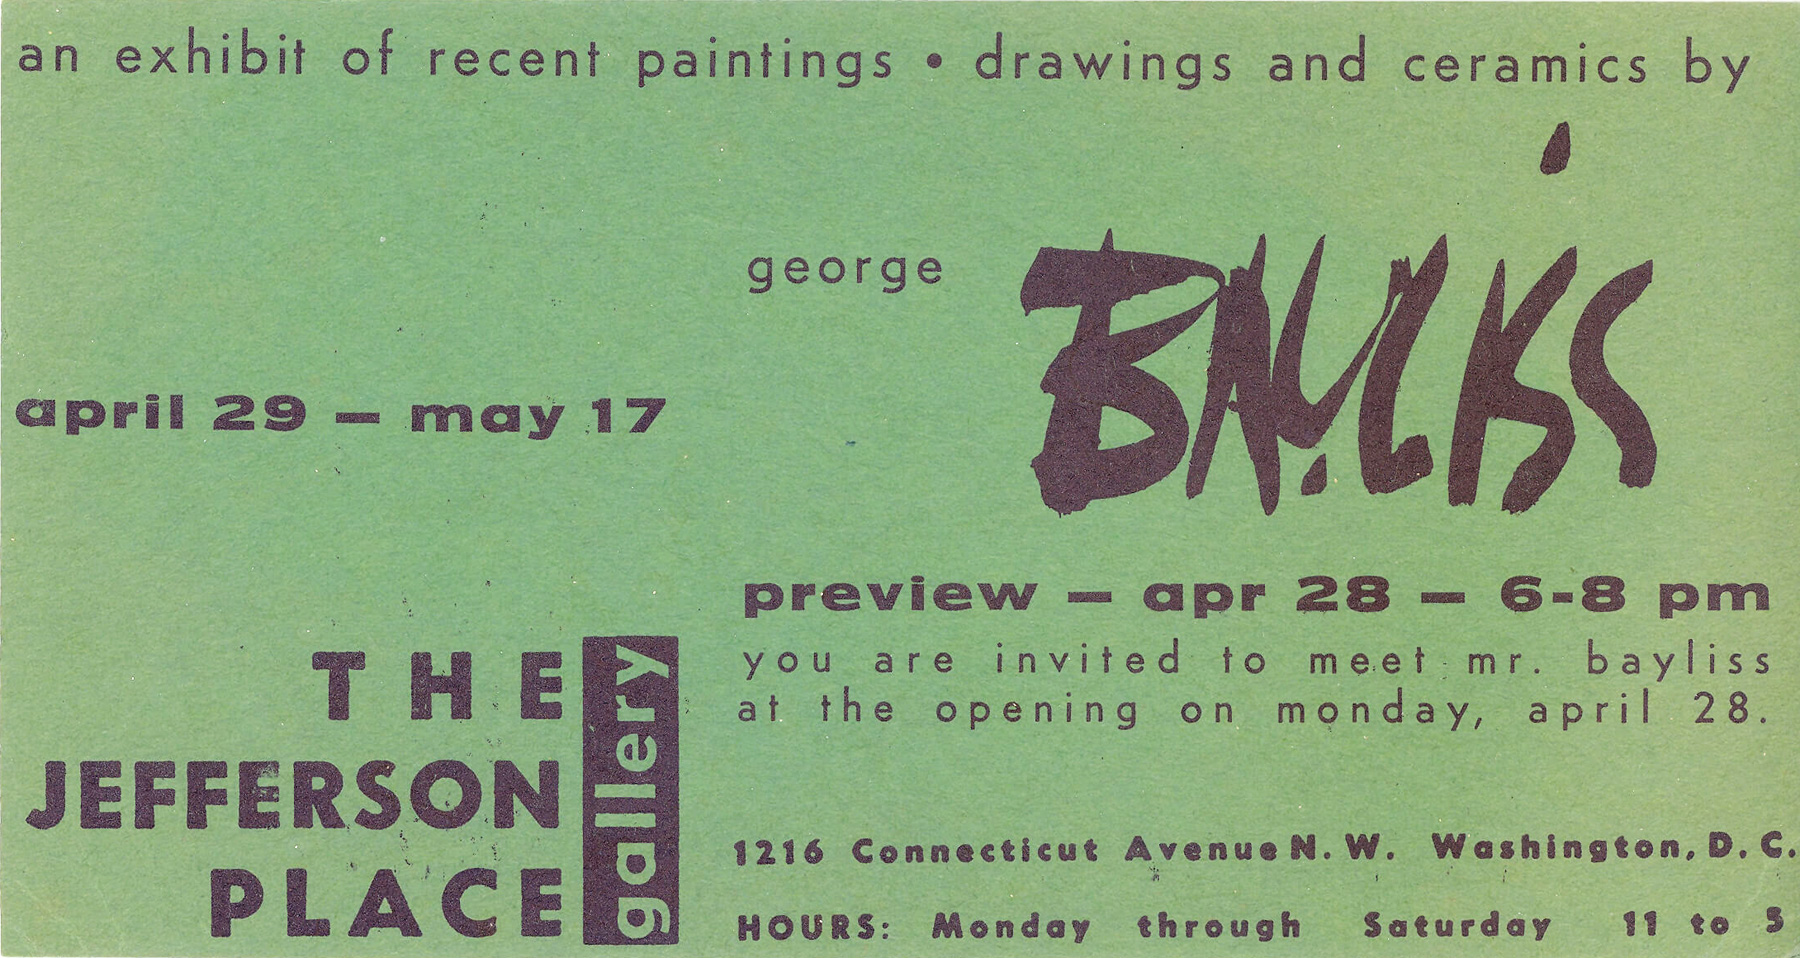 Announcement card for George Bayliss, Paintings and Drawings, at Jefferson Place Gallery